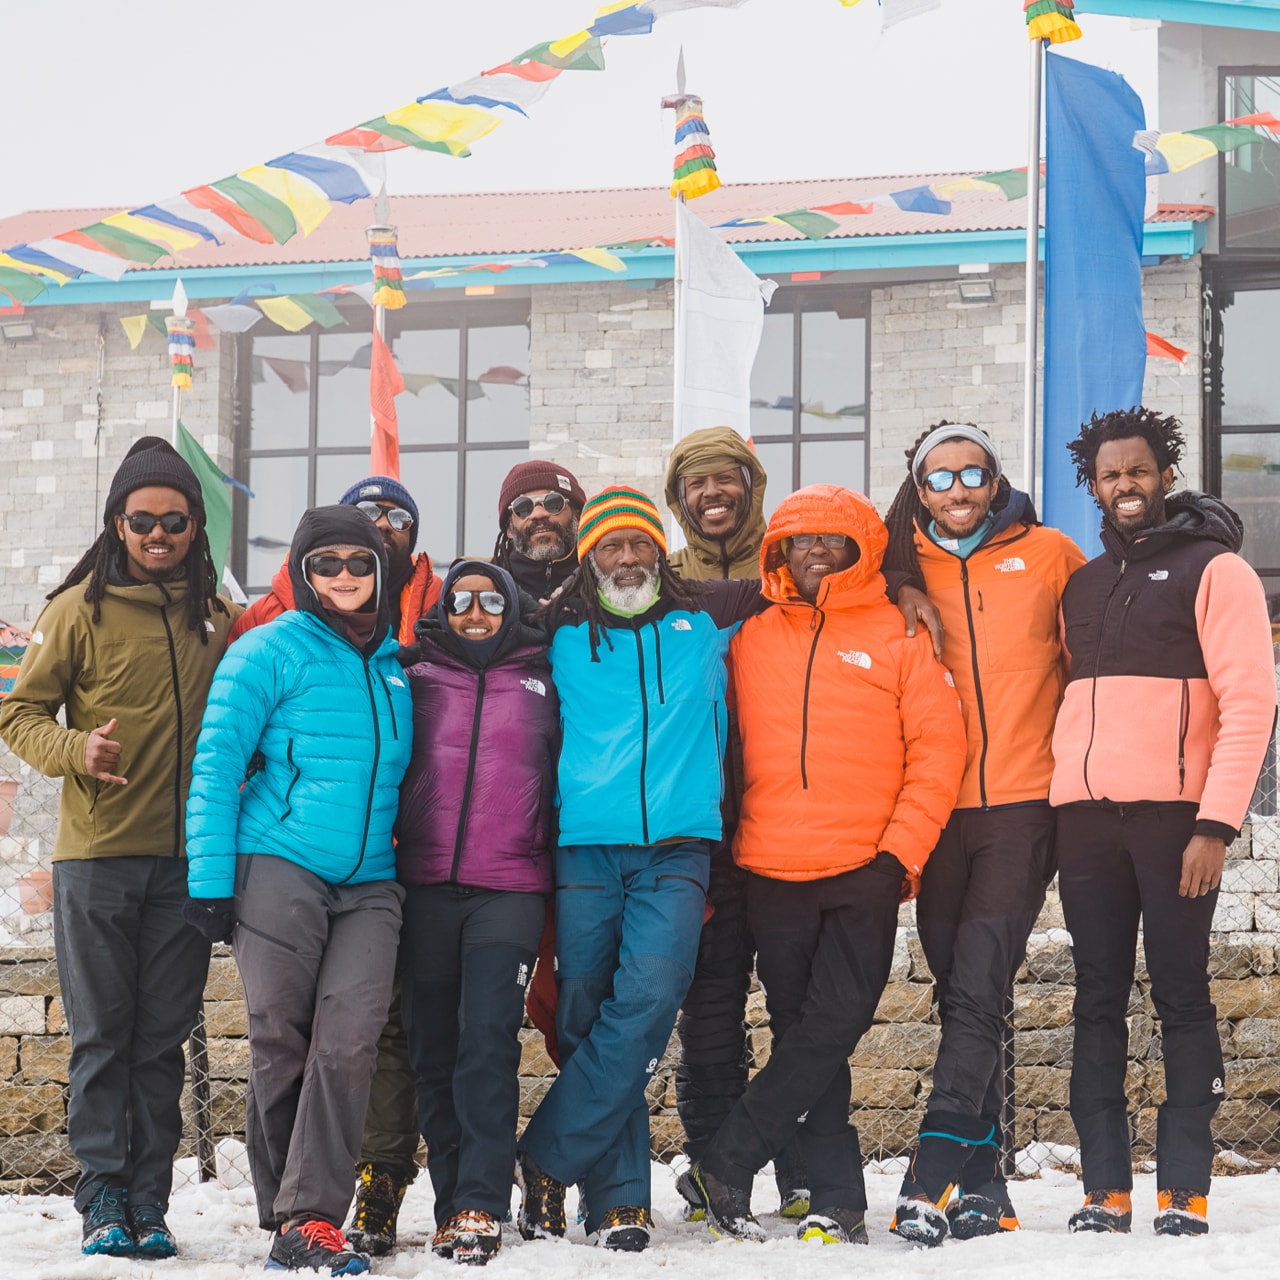 Surrounded by brightly colored prayer flags, the Full Circle Everest team are all smiles during their ascent of Everest. 